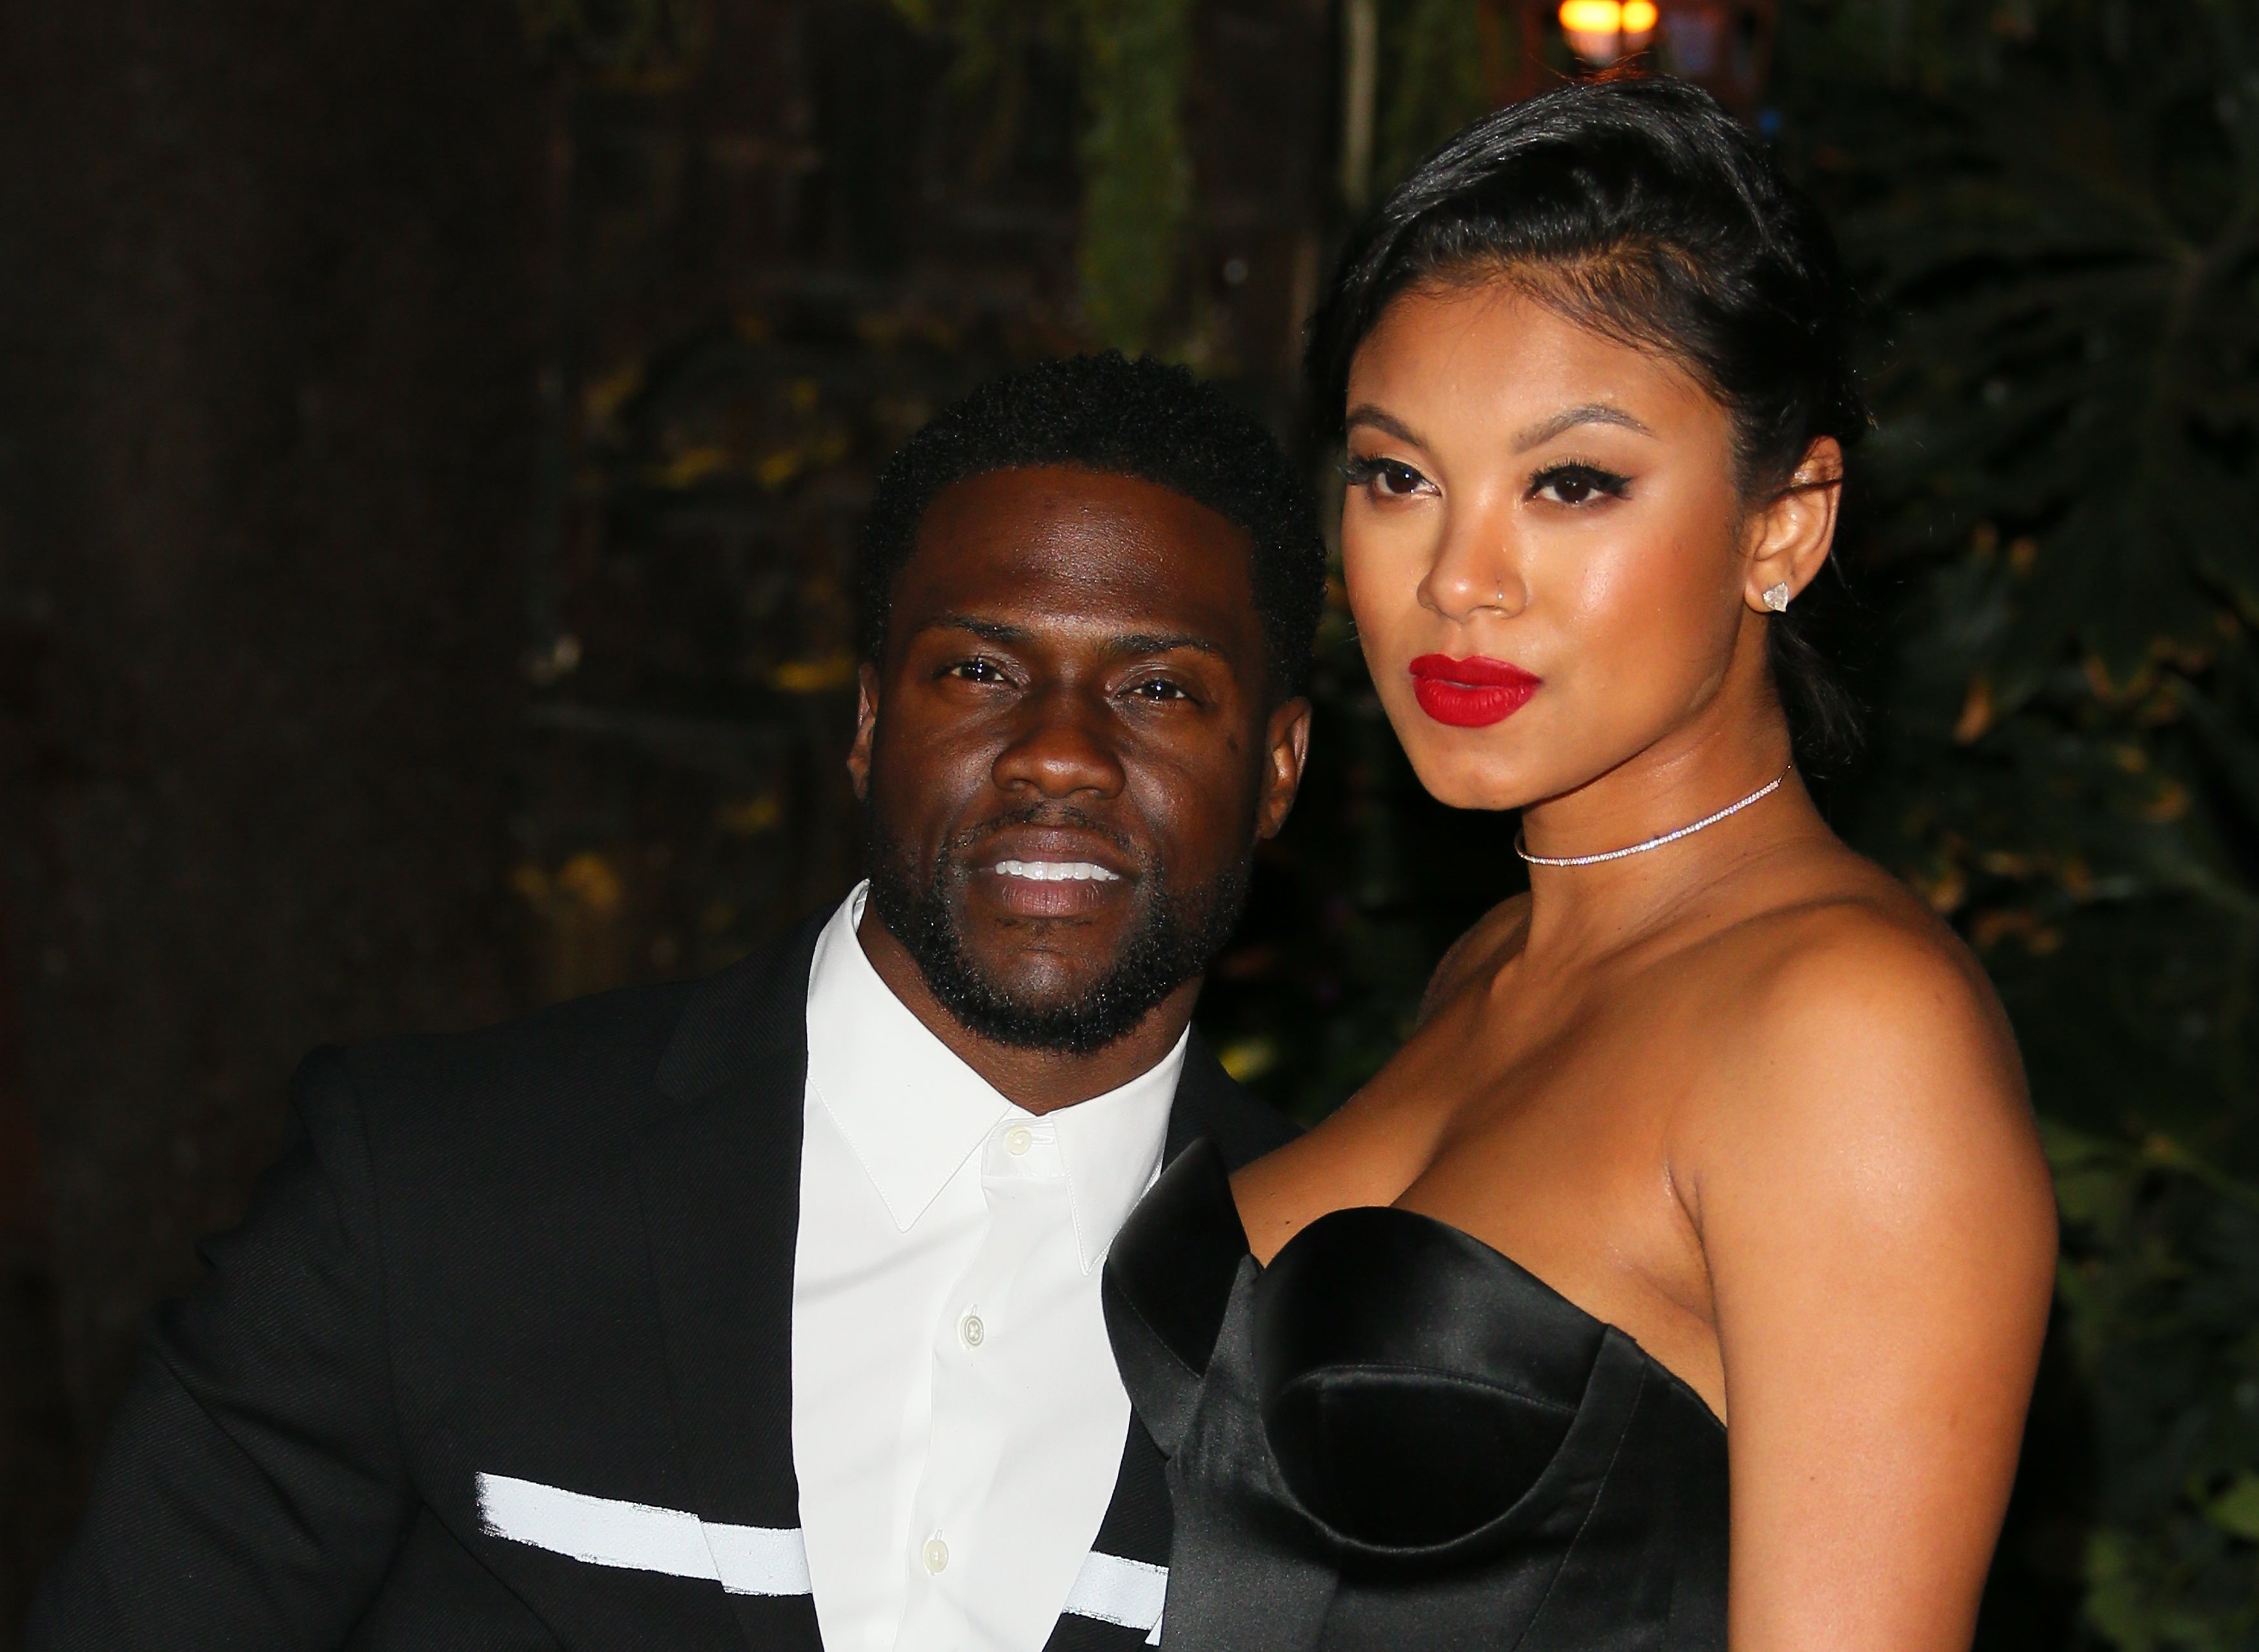 Kevin Hart’s Wife Eniko Found About His Cheating In An Instagram DM